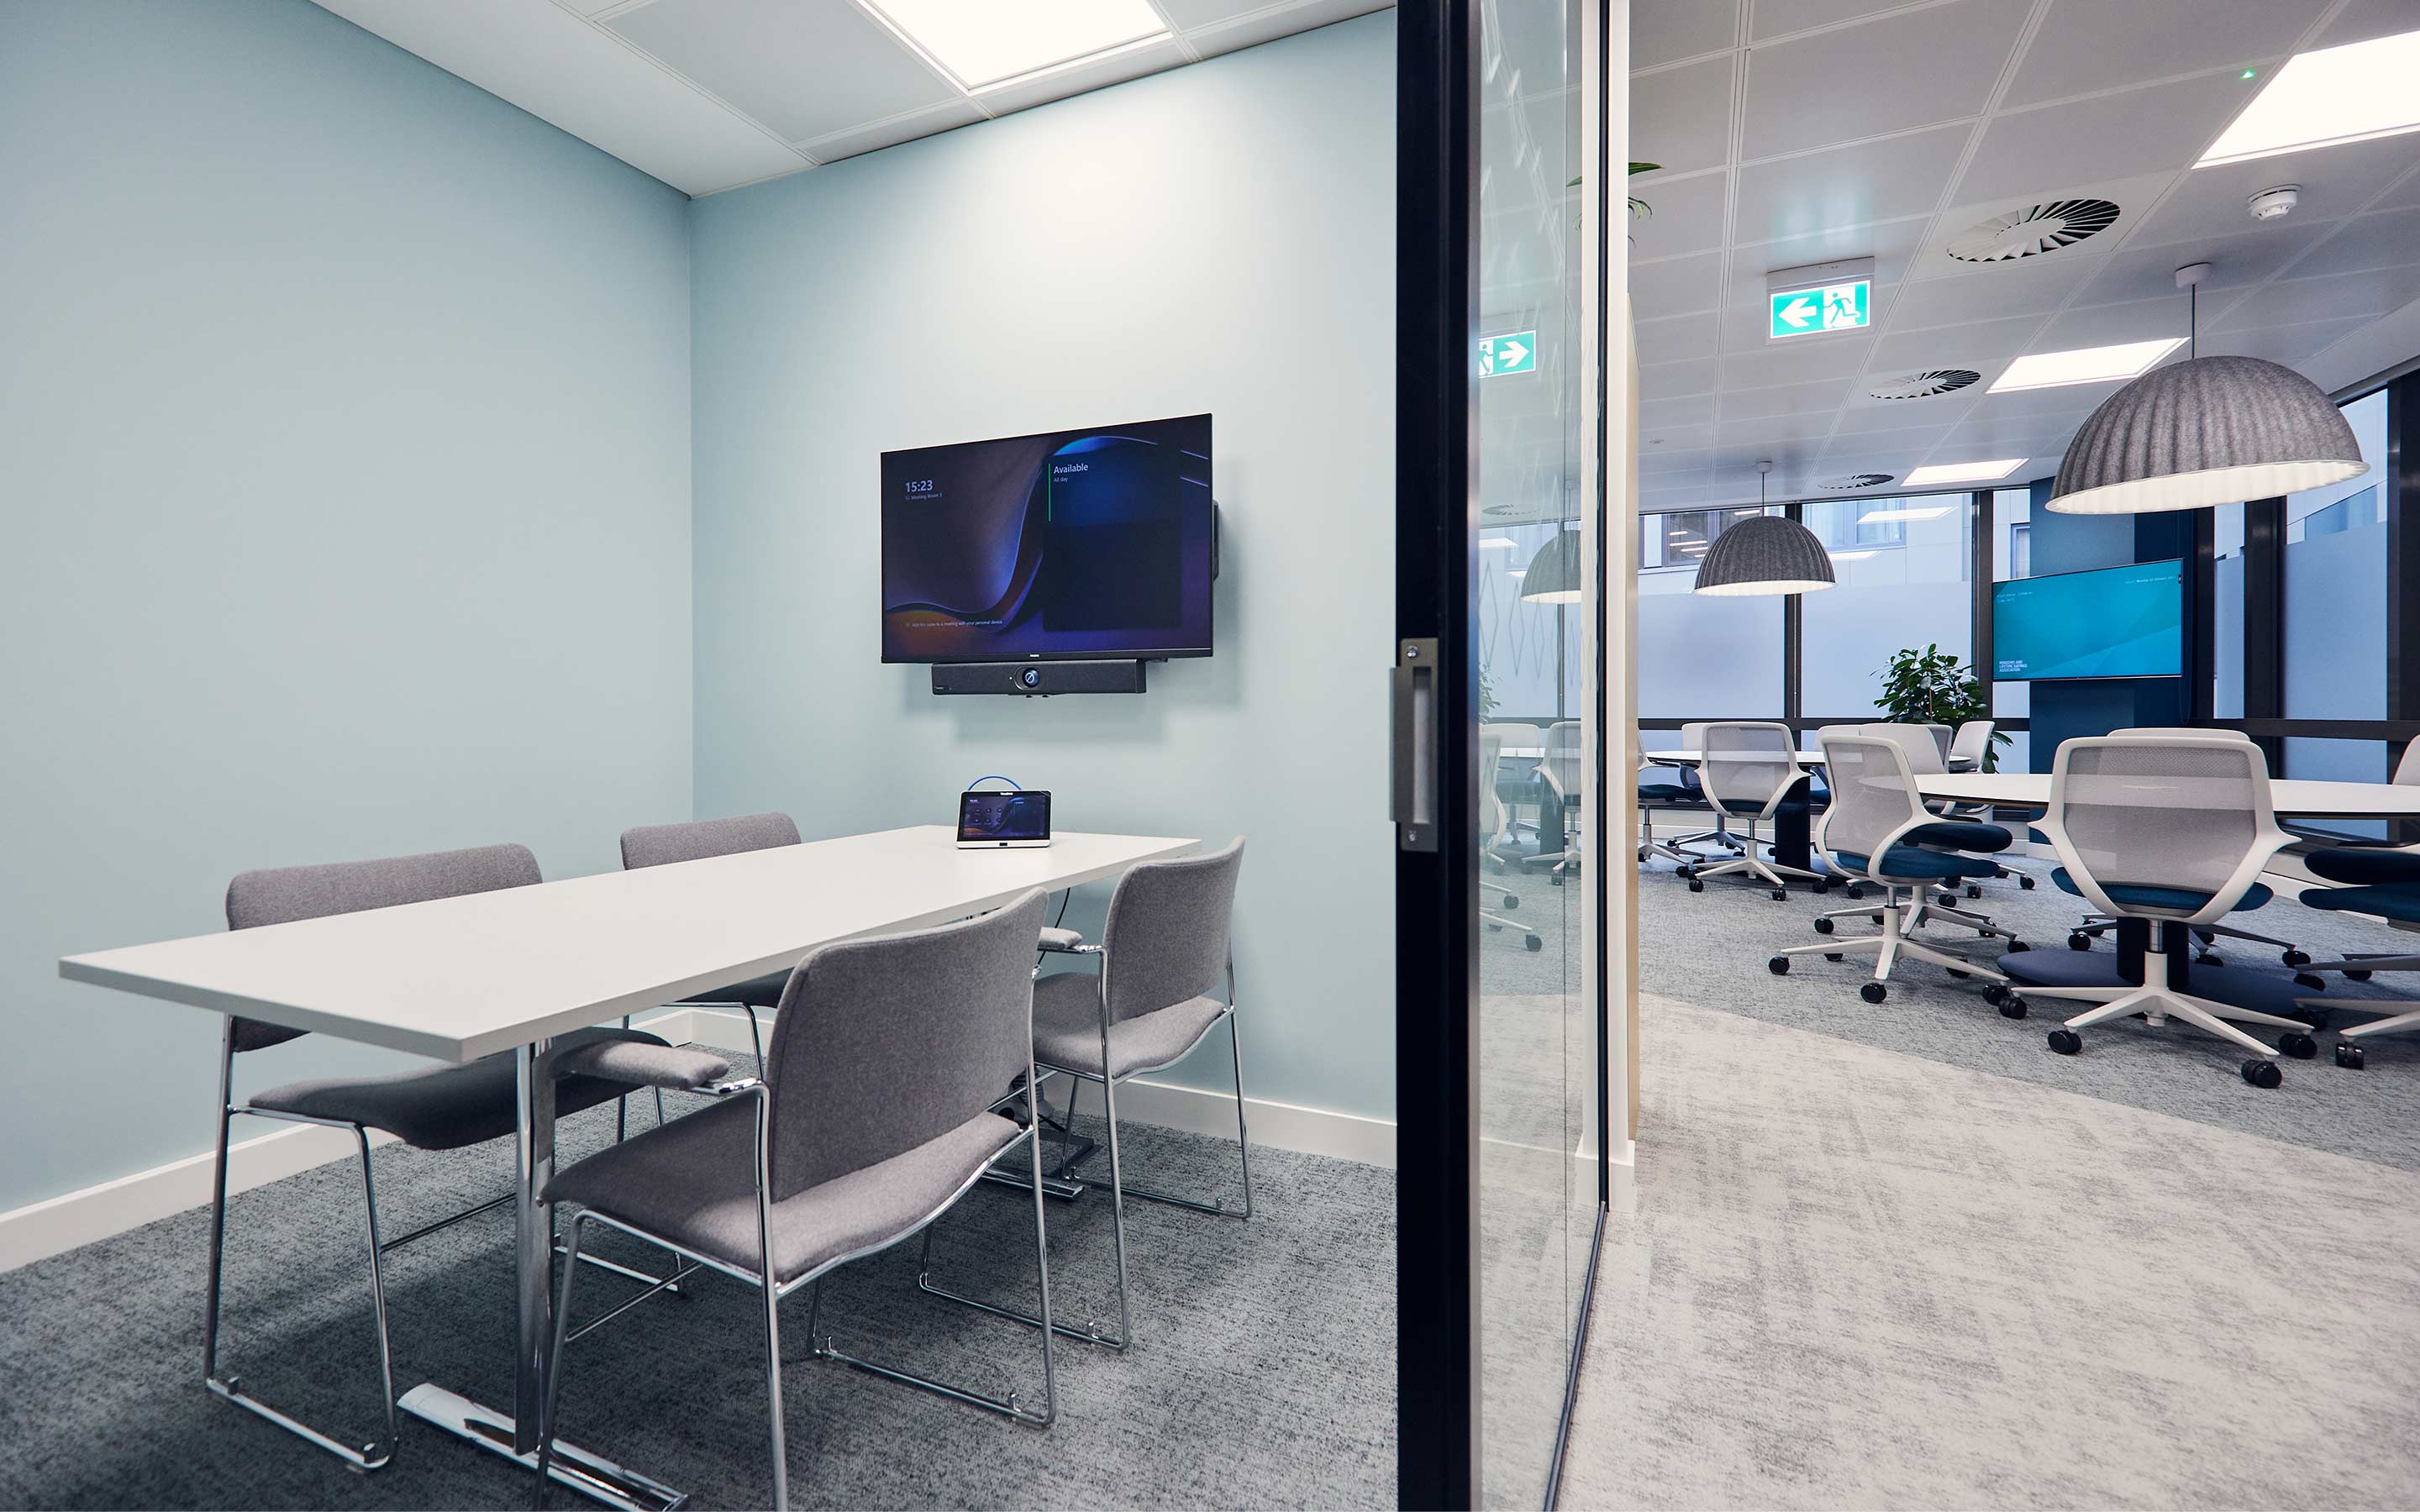 The image shows both a meeting room with glass walls, and a breakout collaboration area beyond with large pendant lighting and round tables